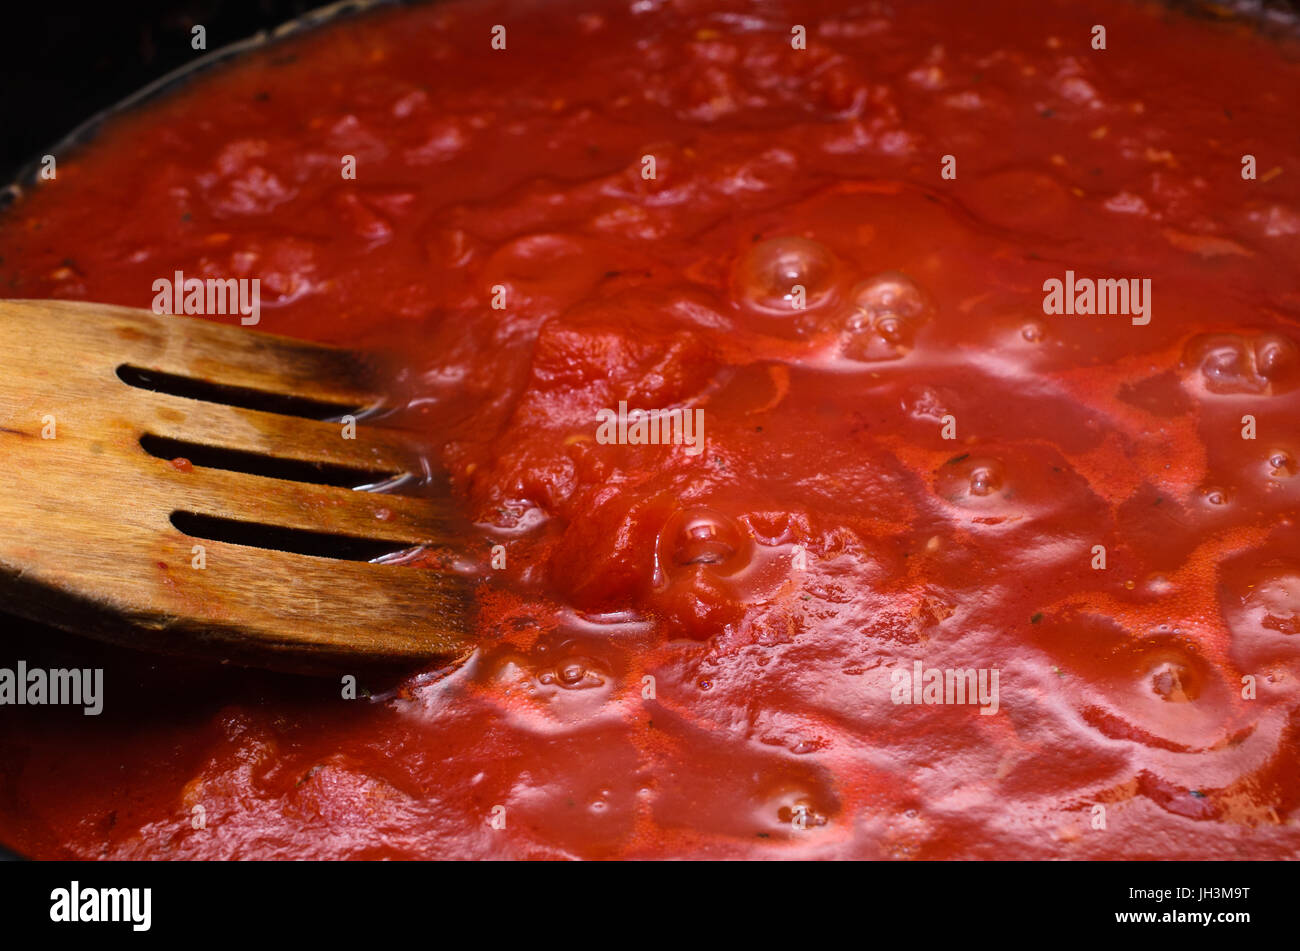 Bubbling hot tomato sauce for pasta, cooking in pan with wooden spatula. Stock Photo